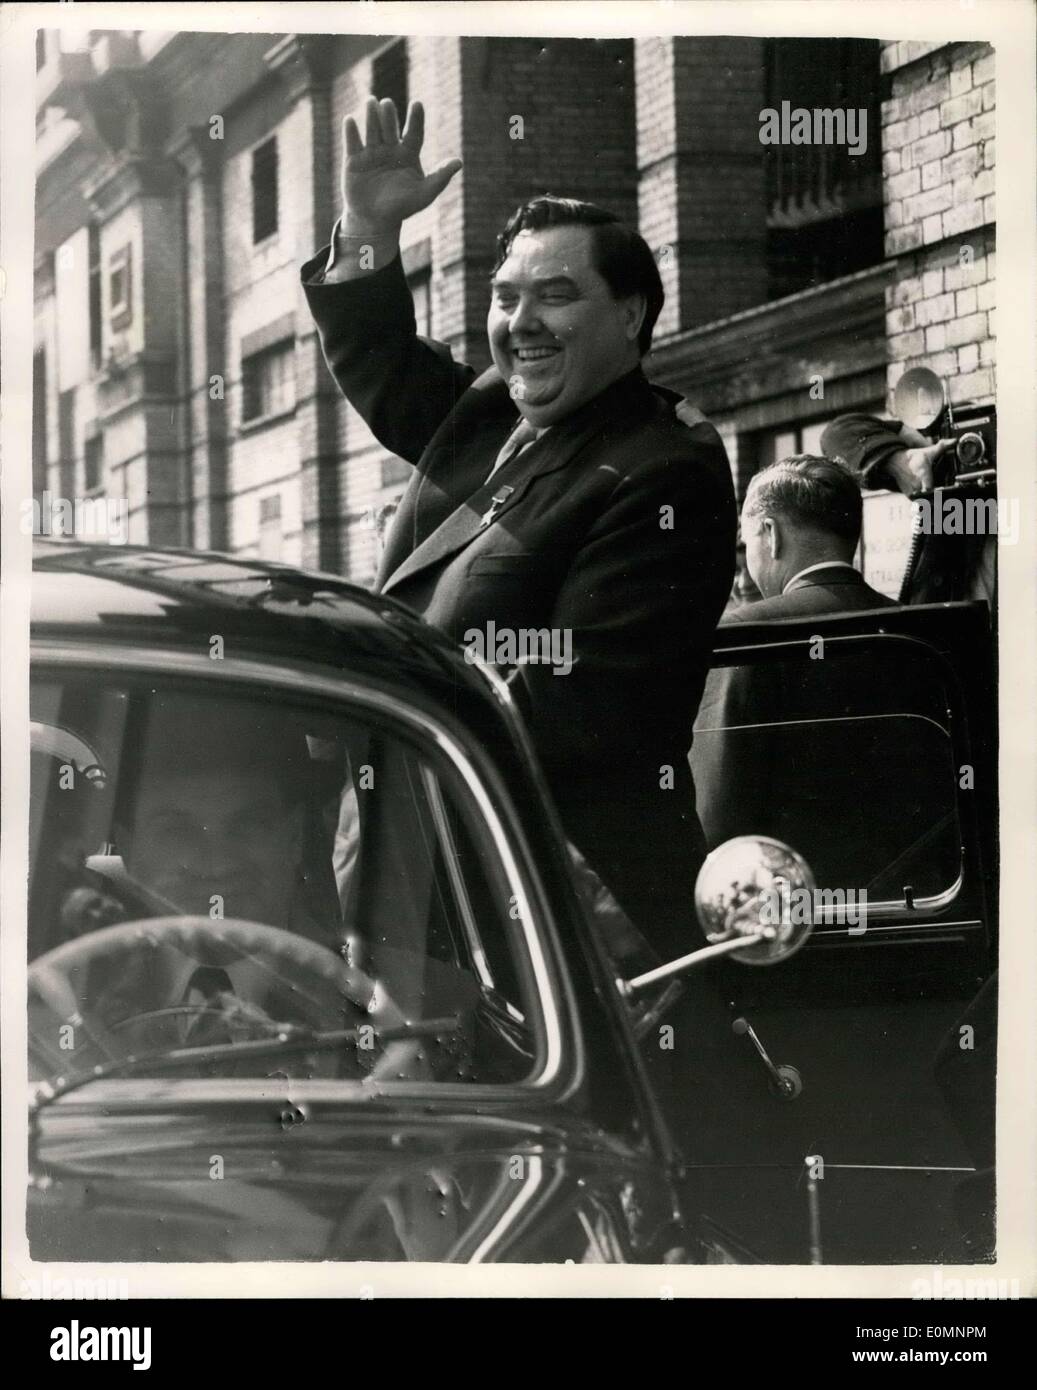 Apr. 02, 1956 - Malenkov visits the B.B.C Studios at Alexandra Palace: Mr. Malenkov today paid a visit to the B.B.C studios at Alexandra Palace to see a film of his 1,700 miles round Britain tour. Photo shows Mr. Malenkov stands on the running board of his car and waves to the crowd as he leaves the studios today. Stock Photo